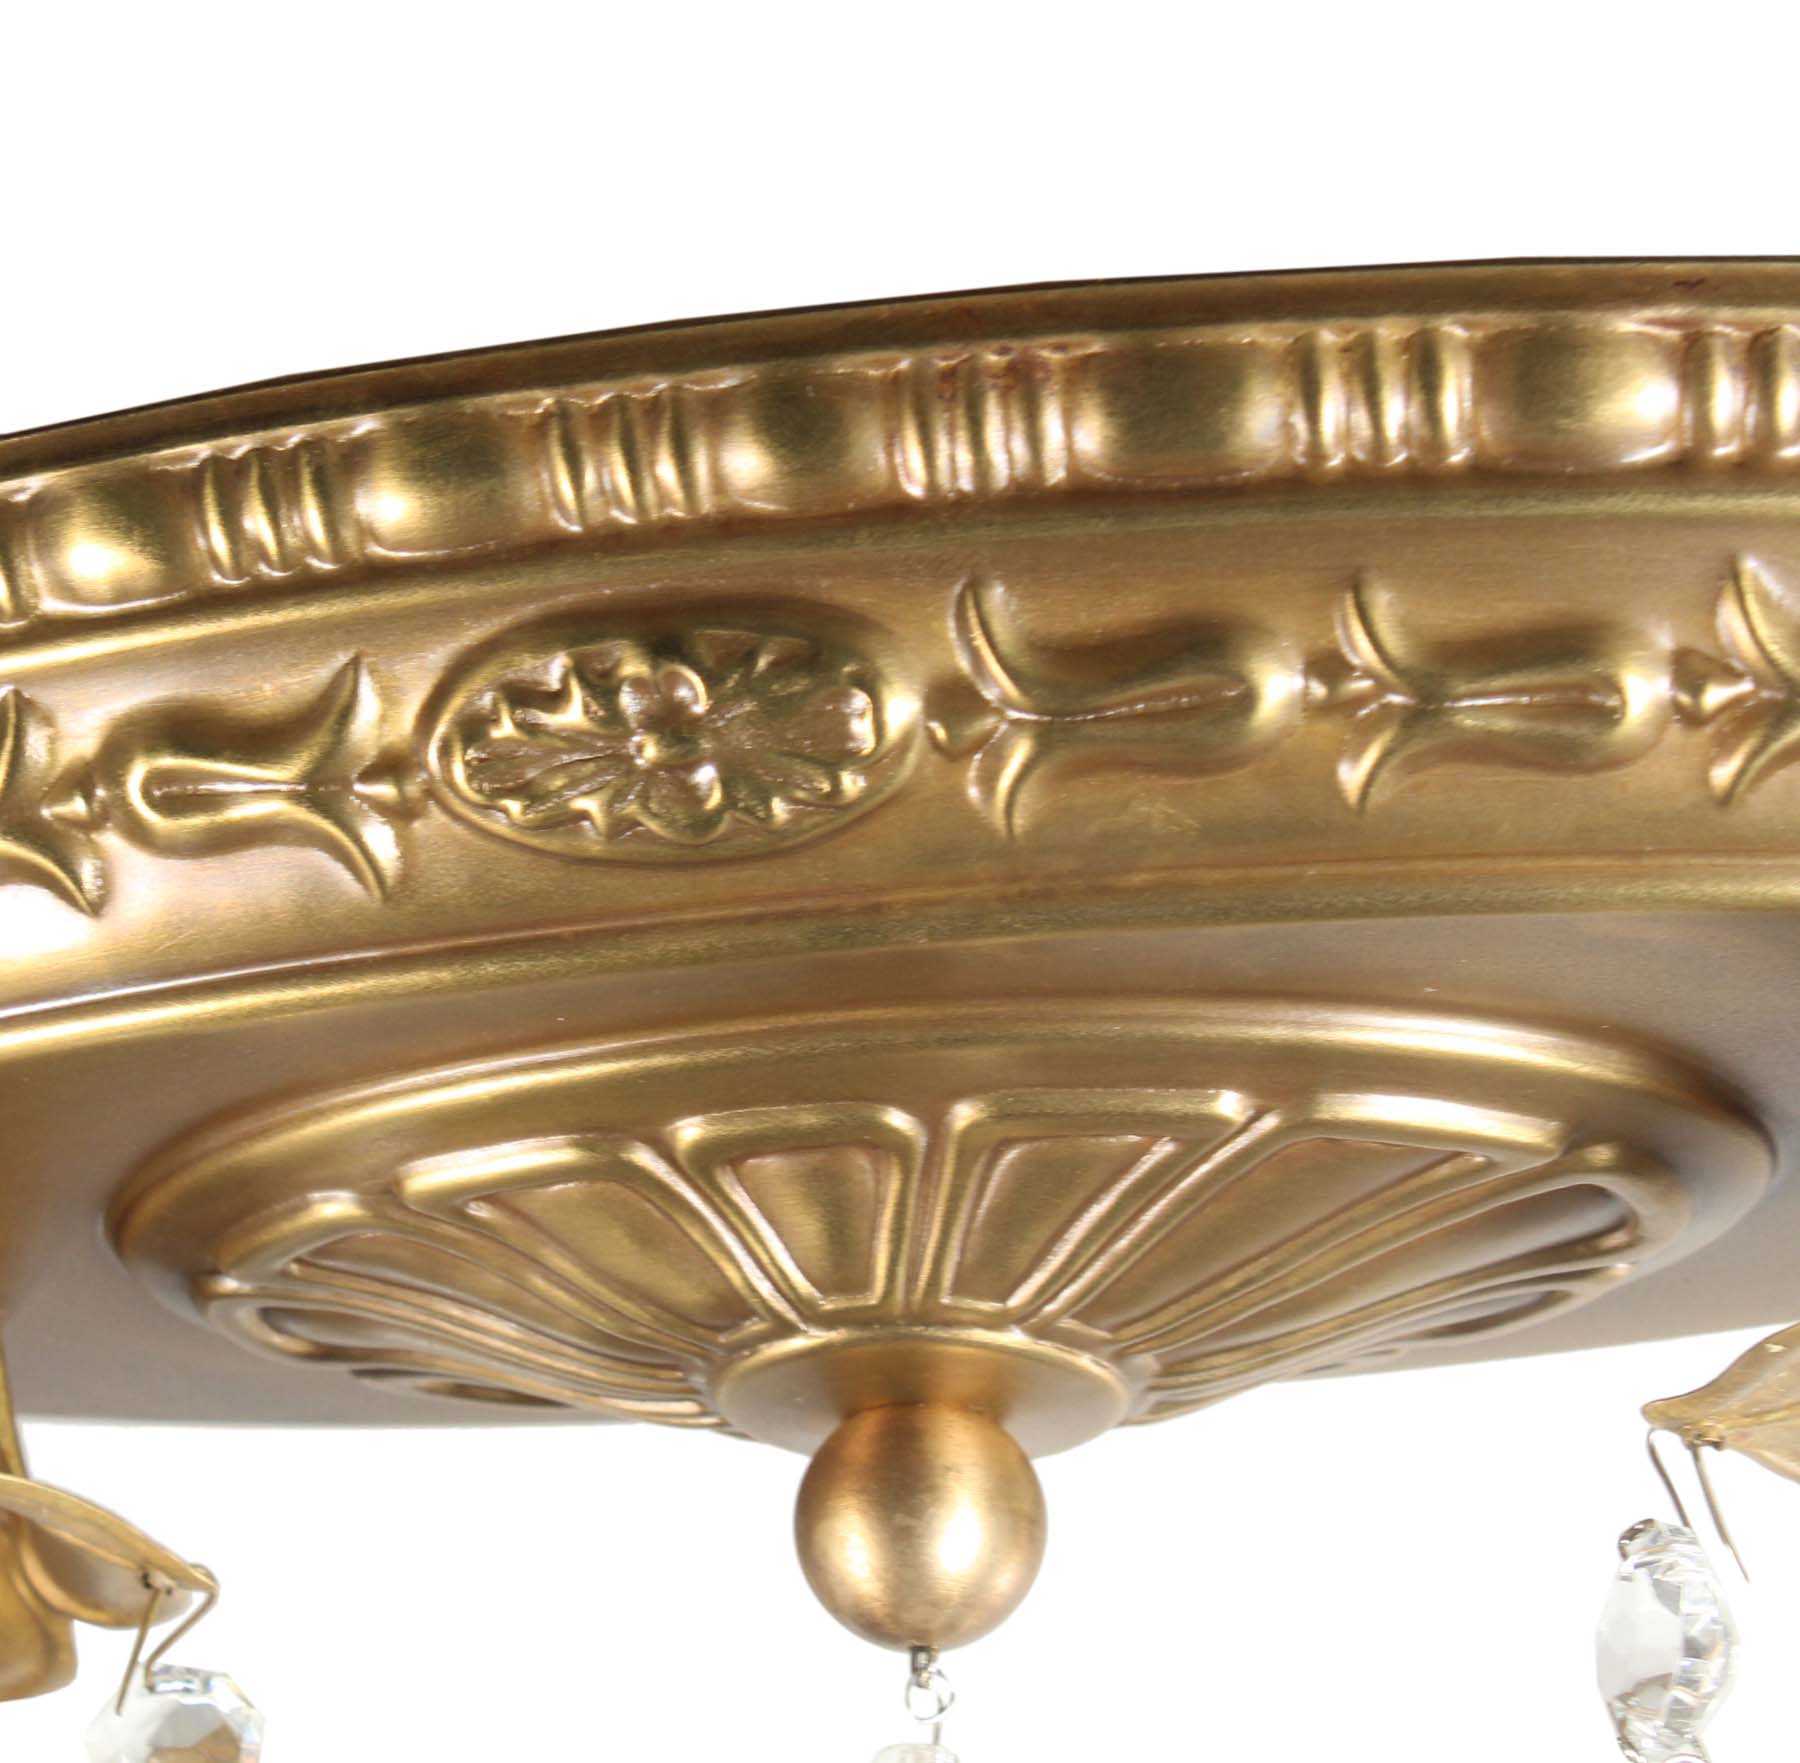 SOLD Antique Neoclassical Flush Mount Fixture with Prisms-68831